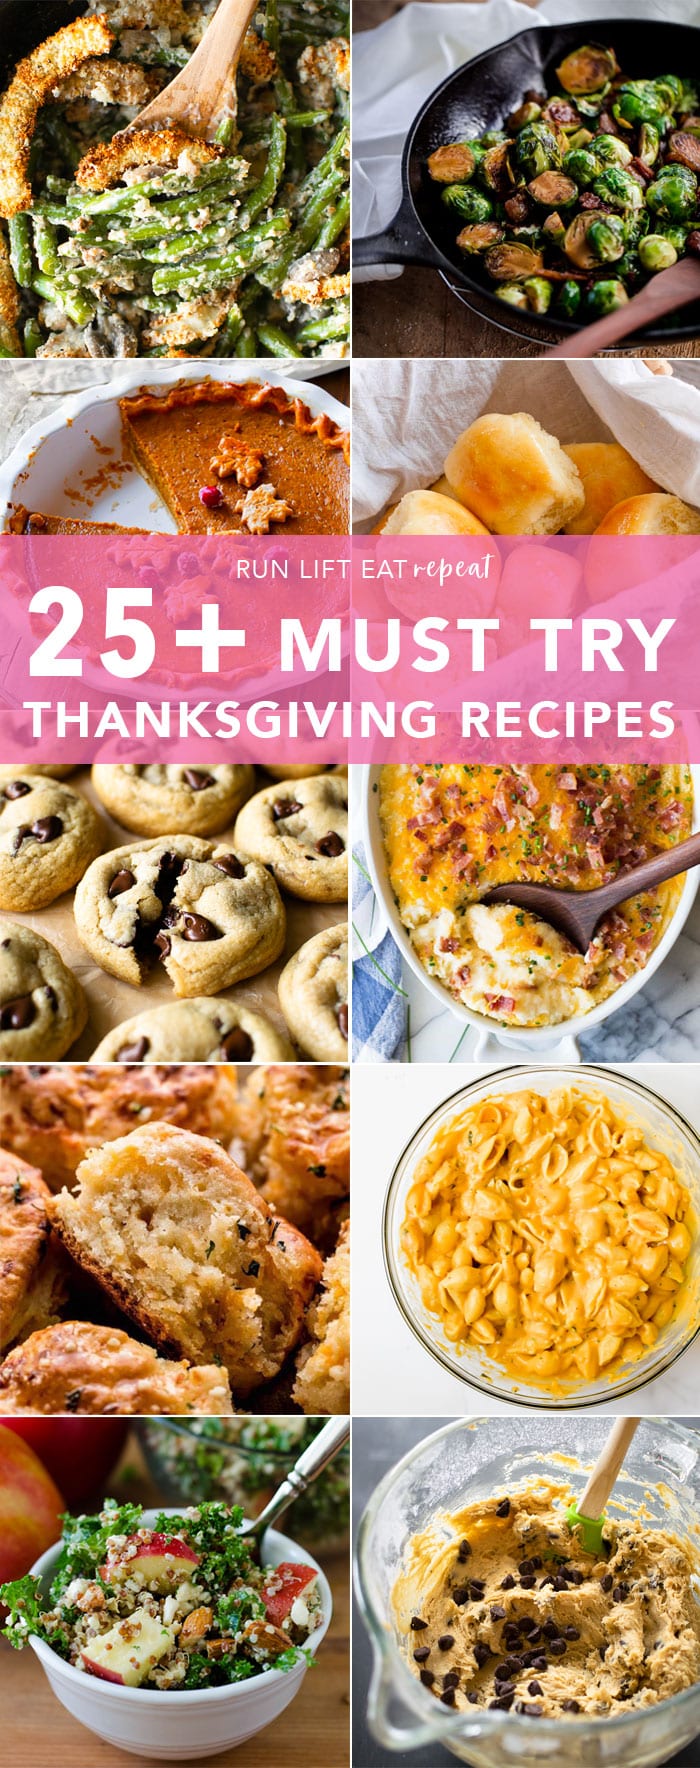 25+ of the BEST Thanksgiving recipes including macaroni and cheese, mashed potatoes, buttery rolls, flaky biscuits, pumpkin pie, and so much more! Find the full list at runlifteatrepeat.com. #thanksgiving #pie #sidedish #dinner #recipe